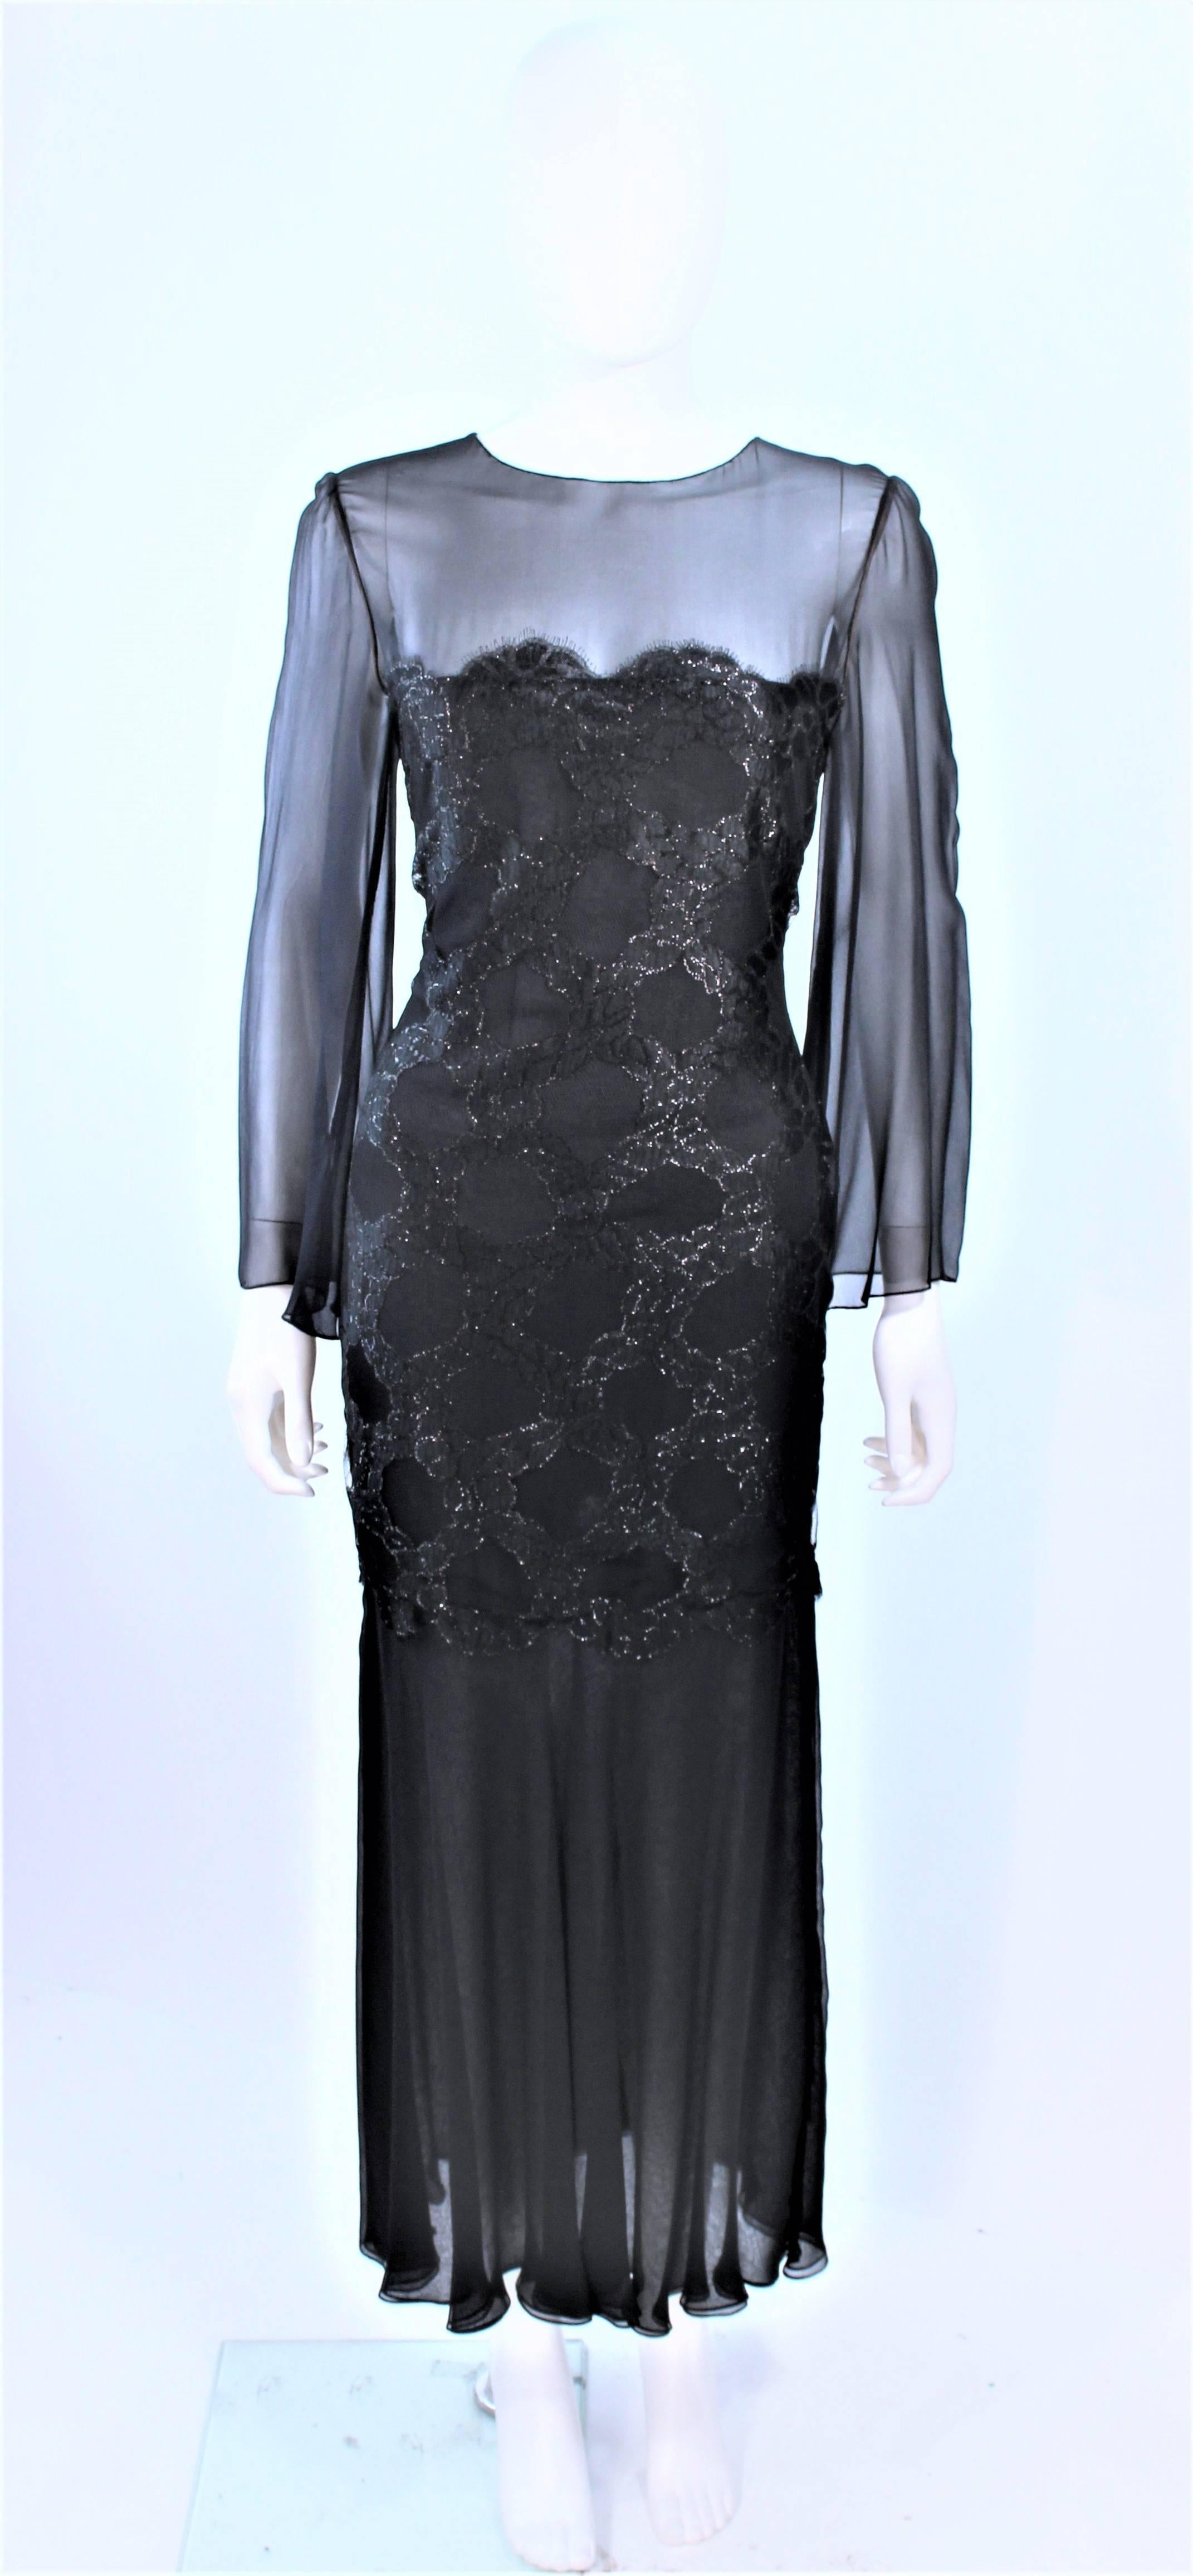 This Bill Blass design is composed of a black chiffon with gold lame metallic bodice. There is a center back zipper closure. In excellent vintage condition.

**Please cross-reference measurements for personal accuracy. Size in description box is